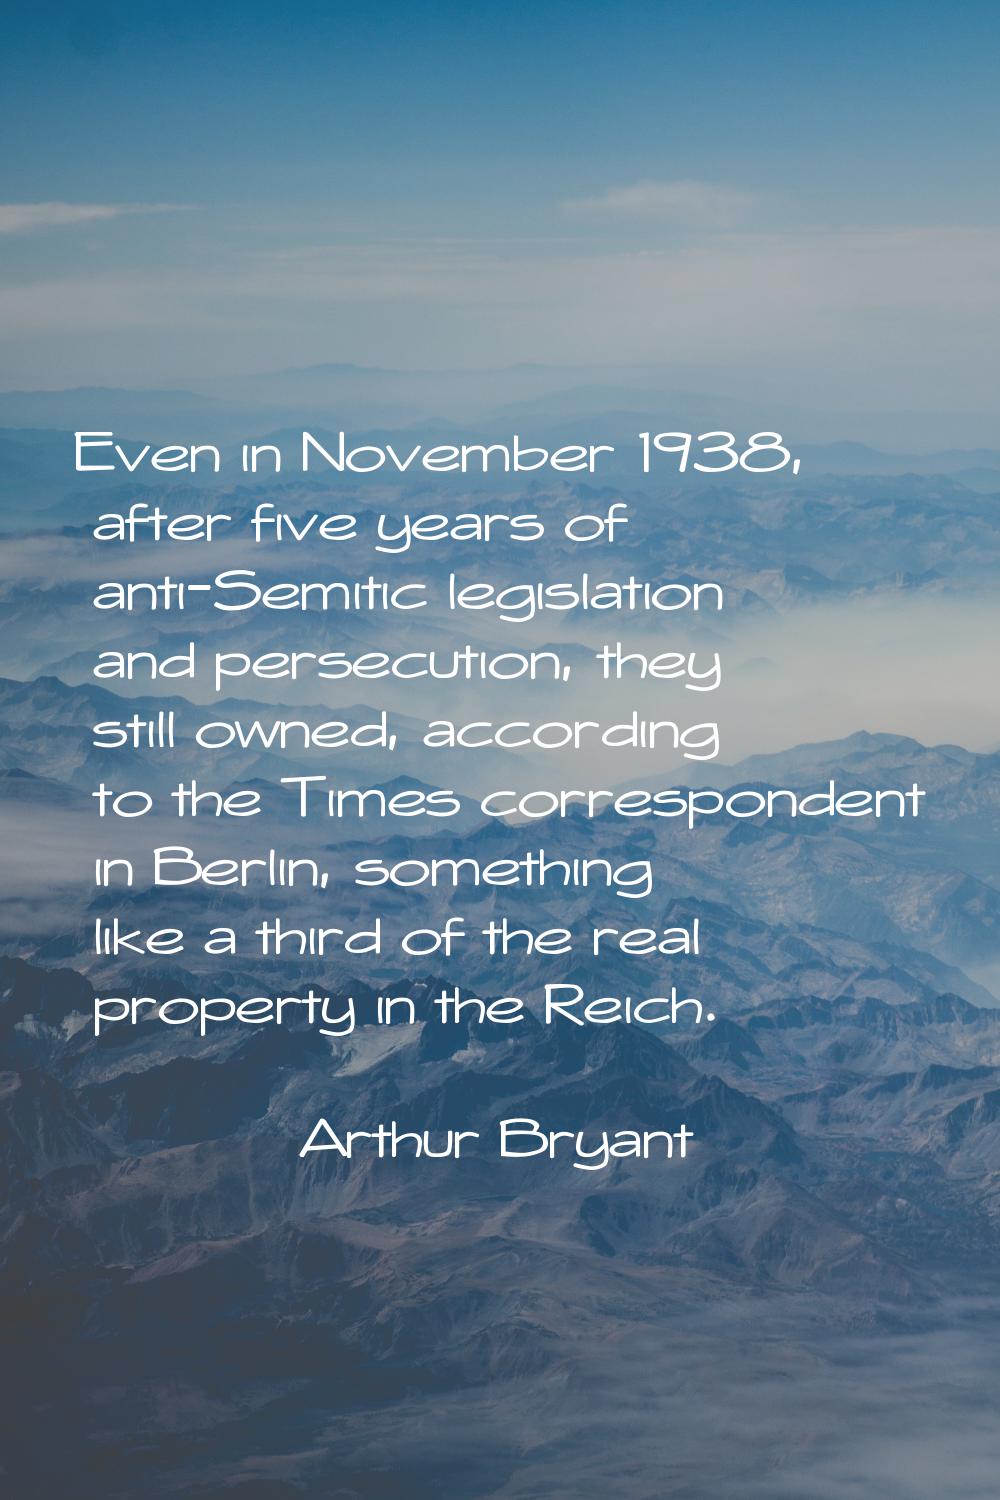 Even in November 1938, after five years of anti-Semitic legislation and persecution, they still own